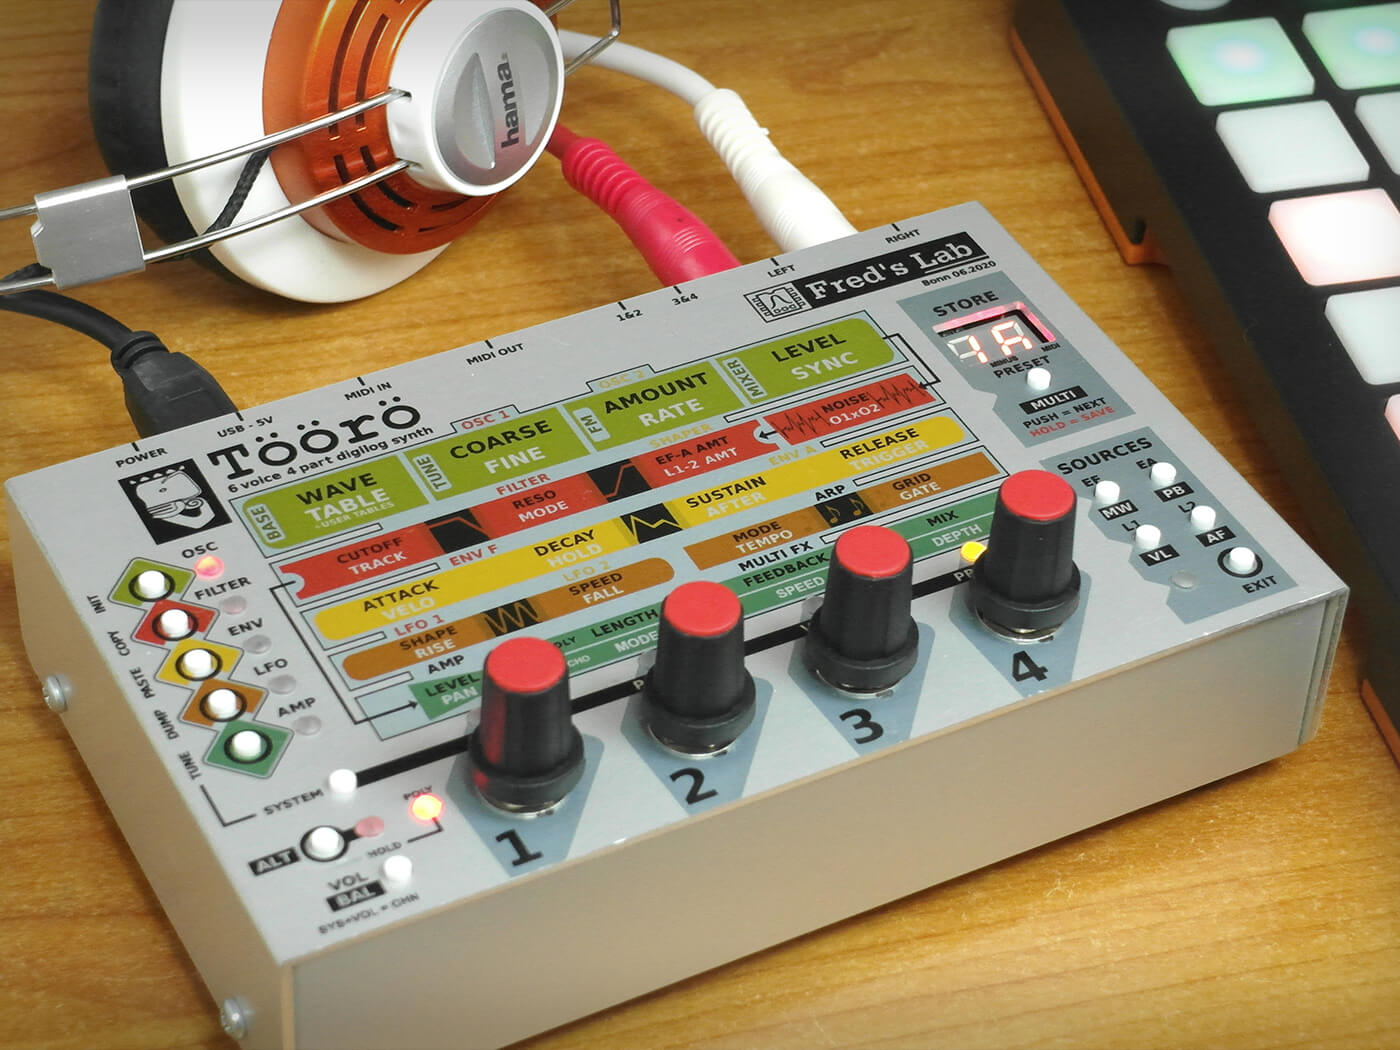 Fred's Lab Tooro Synth